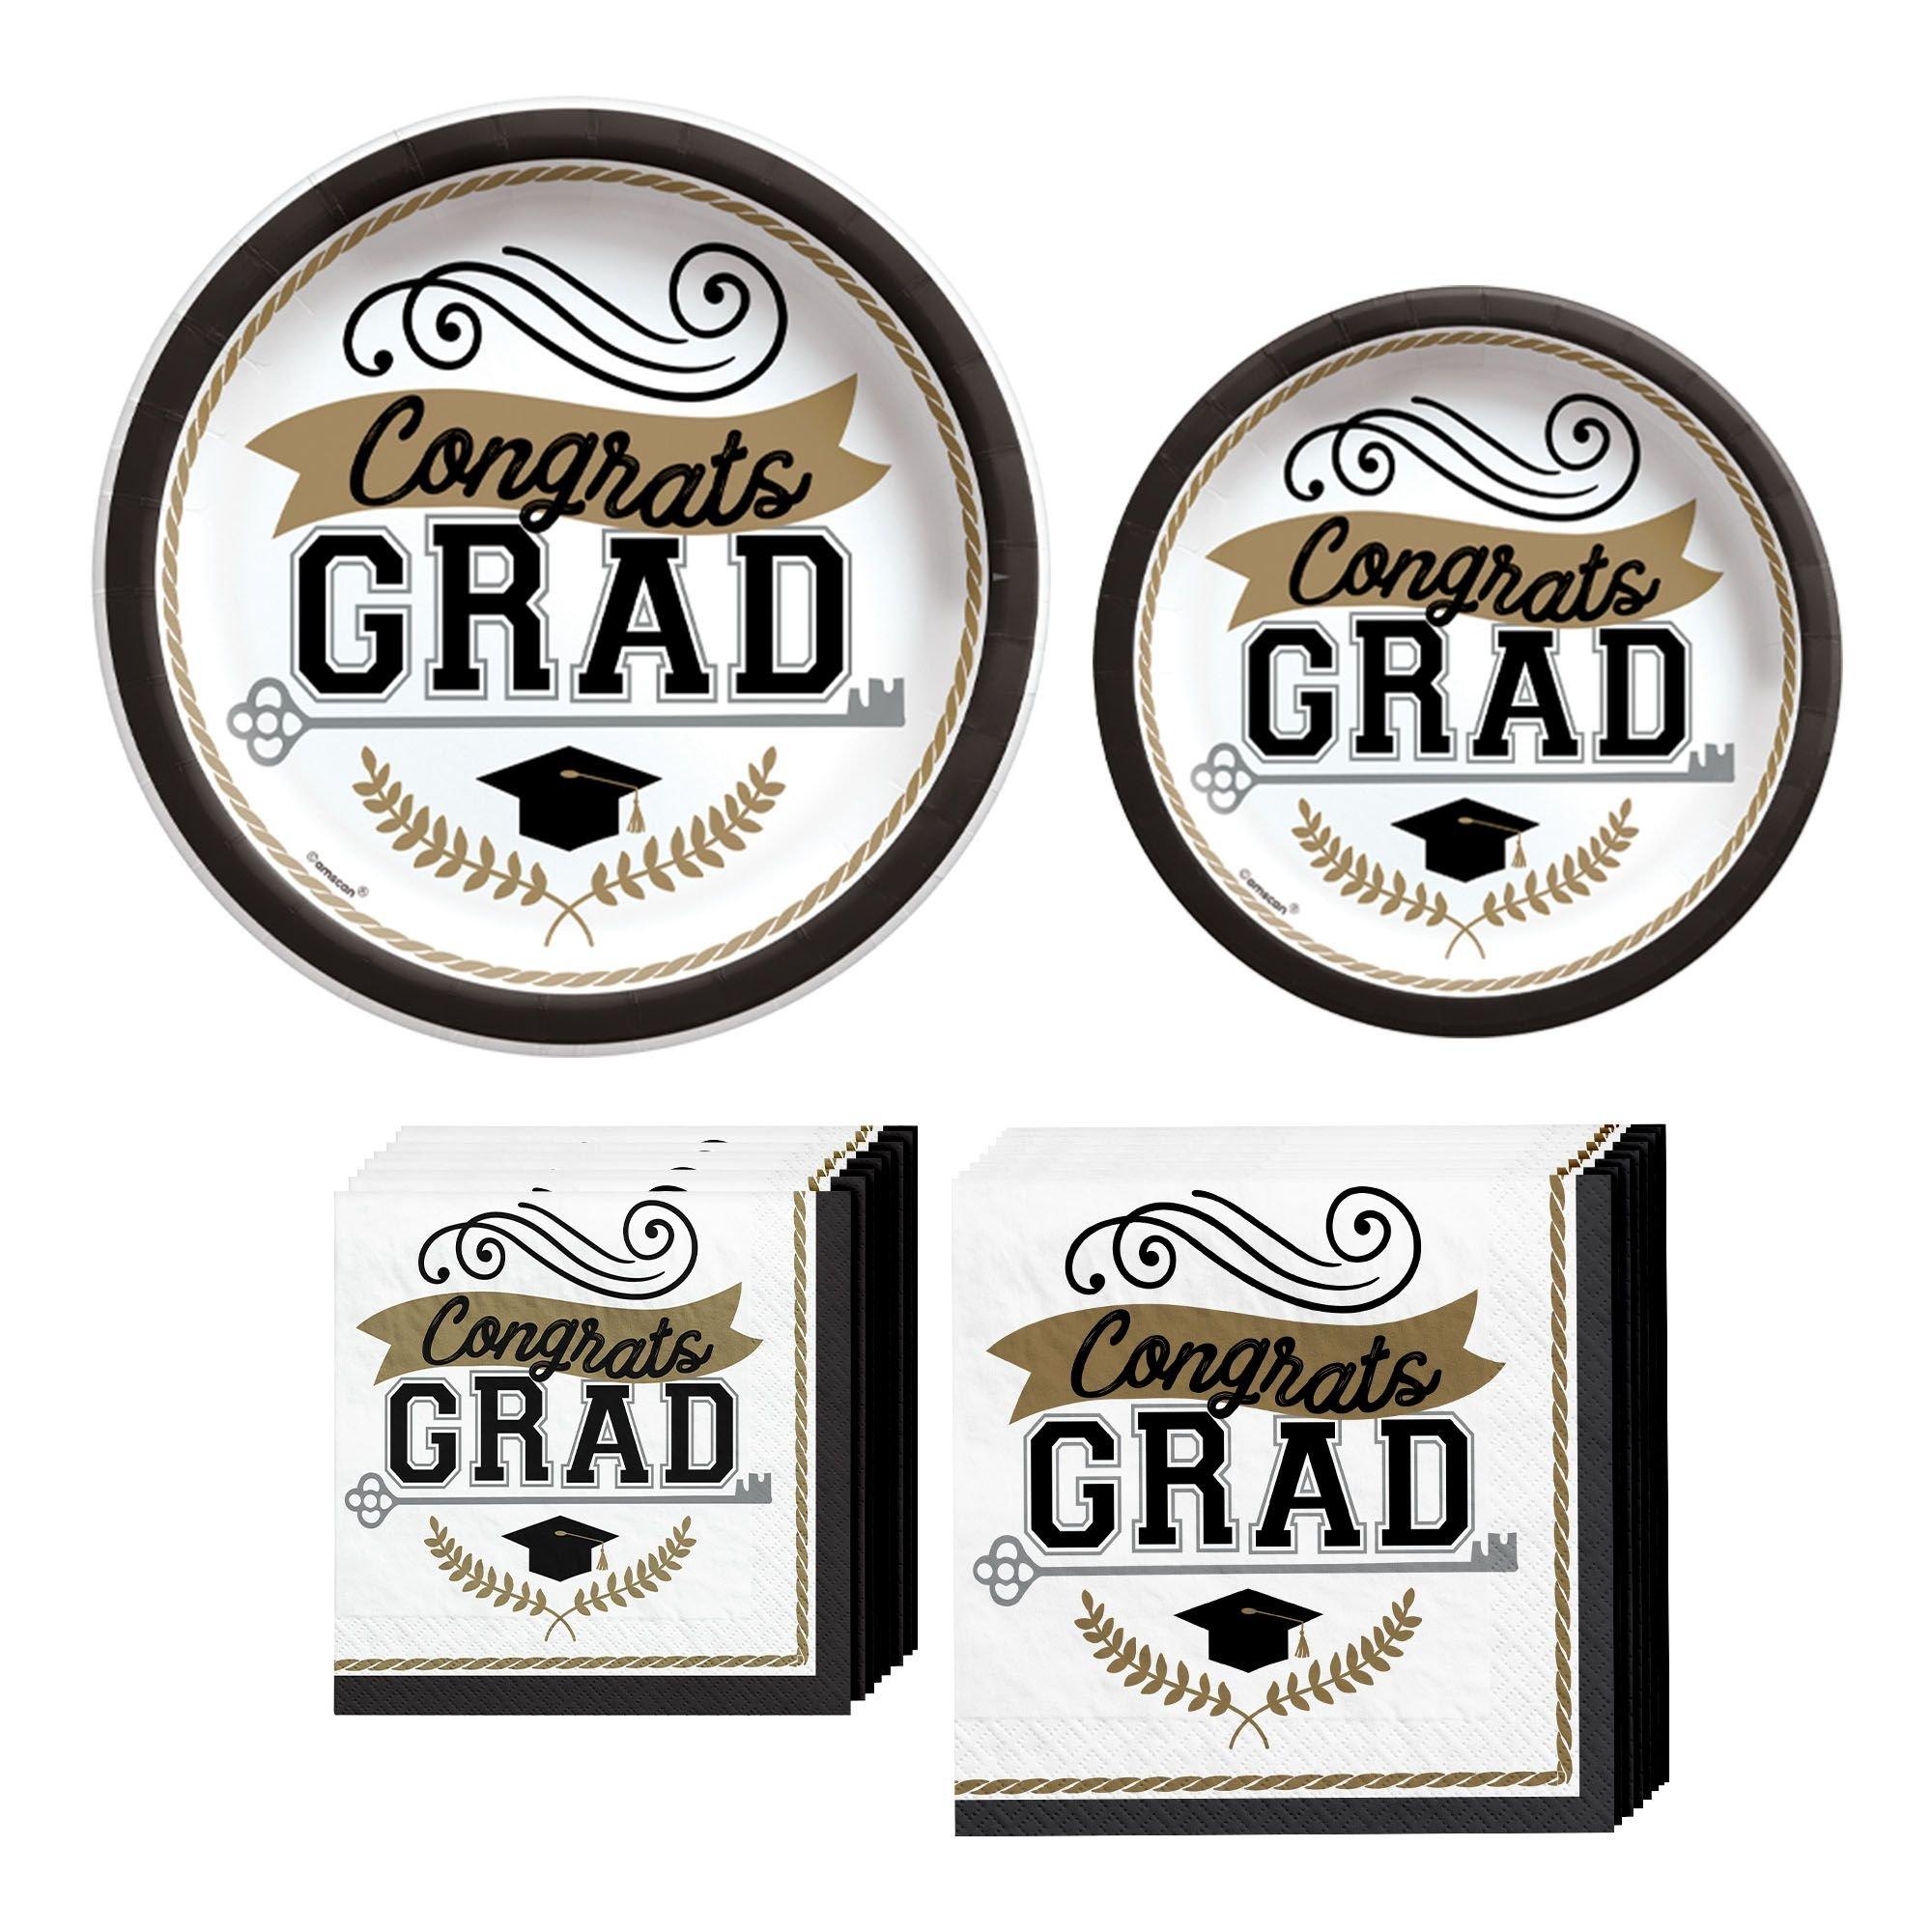 Graduation Party Supplies Kit for 50 with Plates, Napkins - Achievement is Key